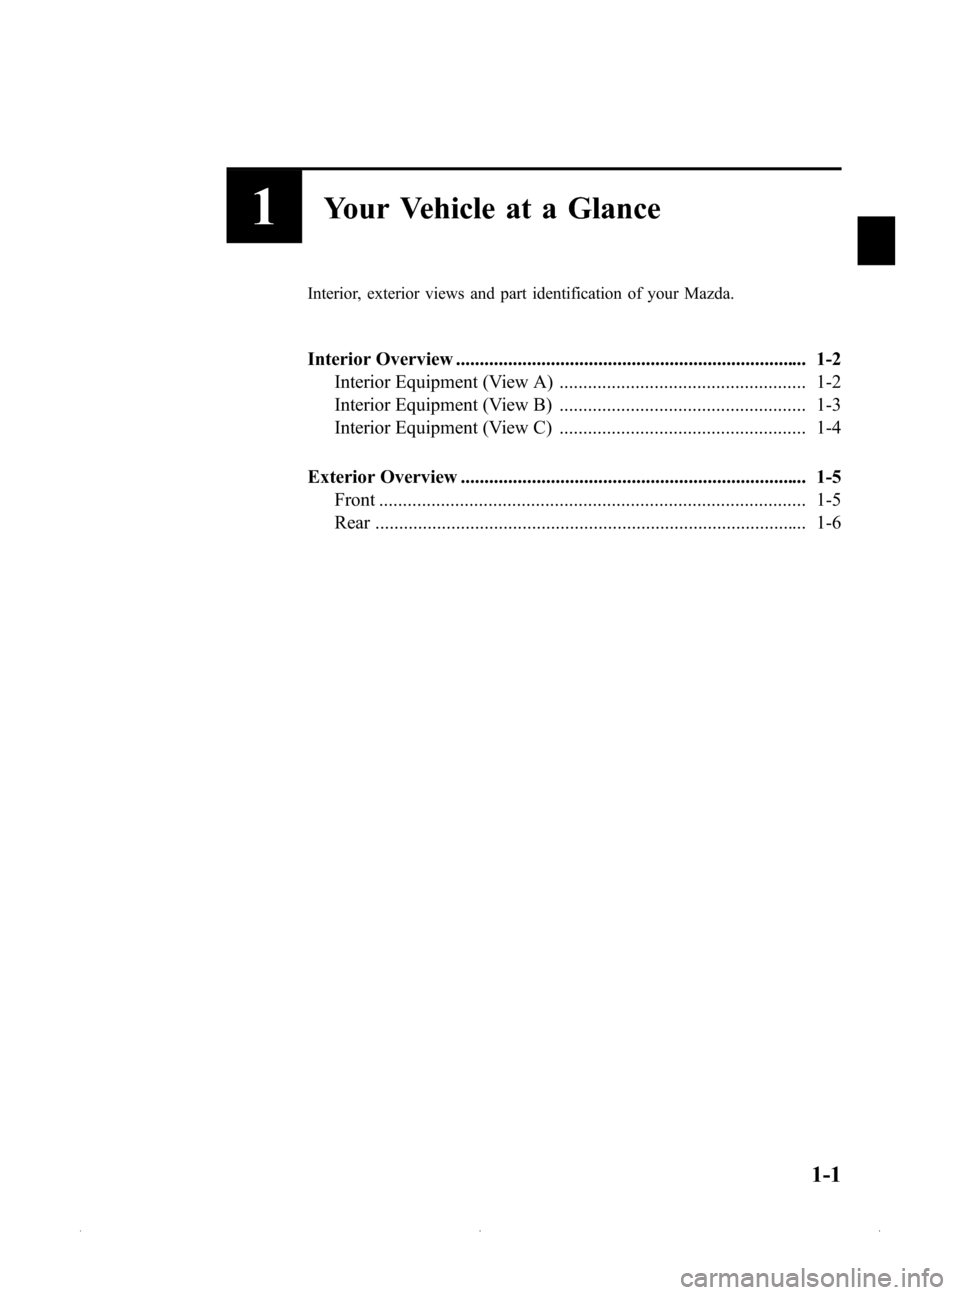 MAZDA MODEL MX-5 2015  Owners Manual (in English) Black plate (7,1)
1Your Vehicle at a Glance
Interior, exterior views and part identification of your Mazda.
Interior Overview ..........................................................................